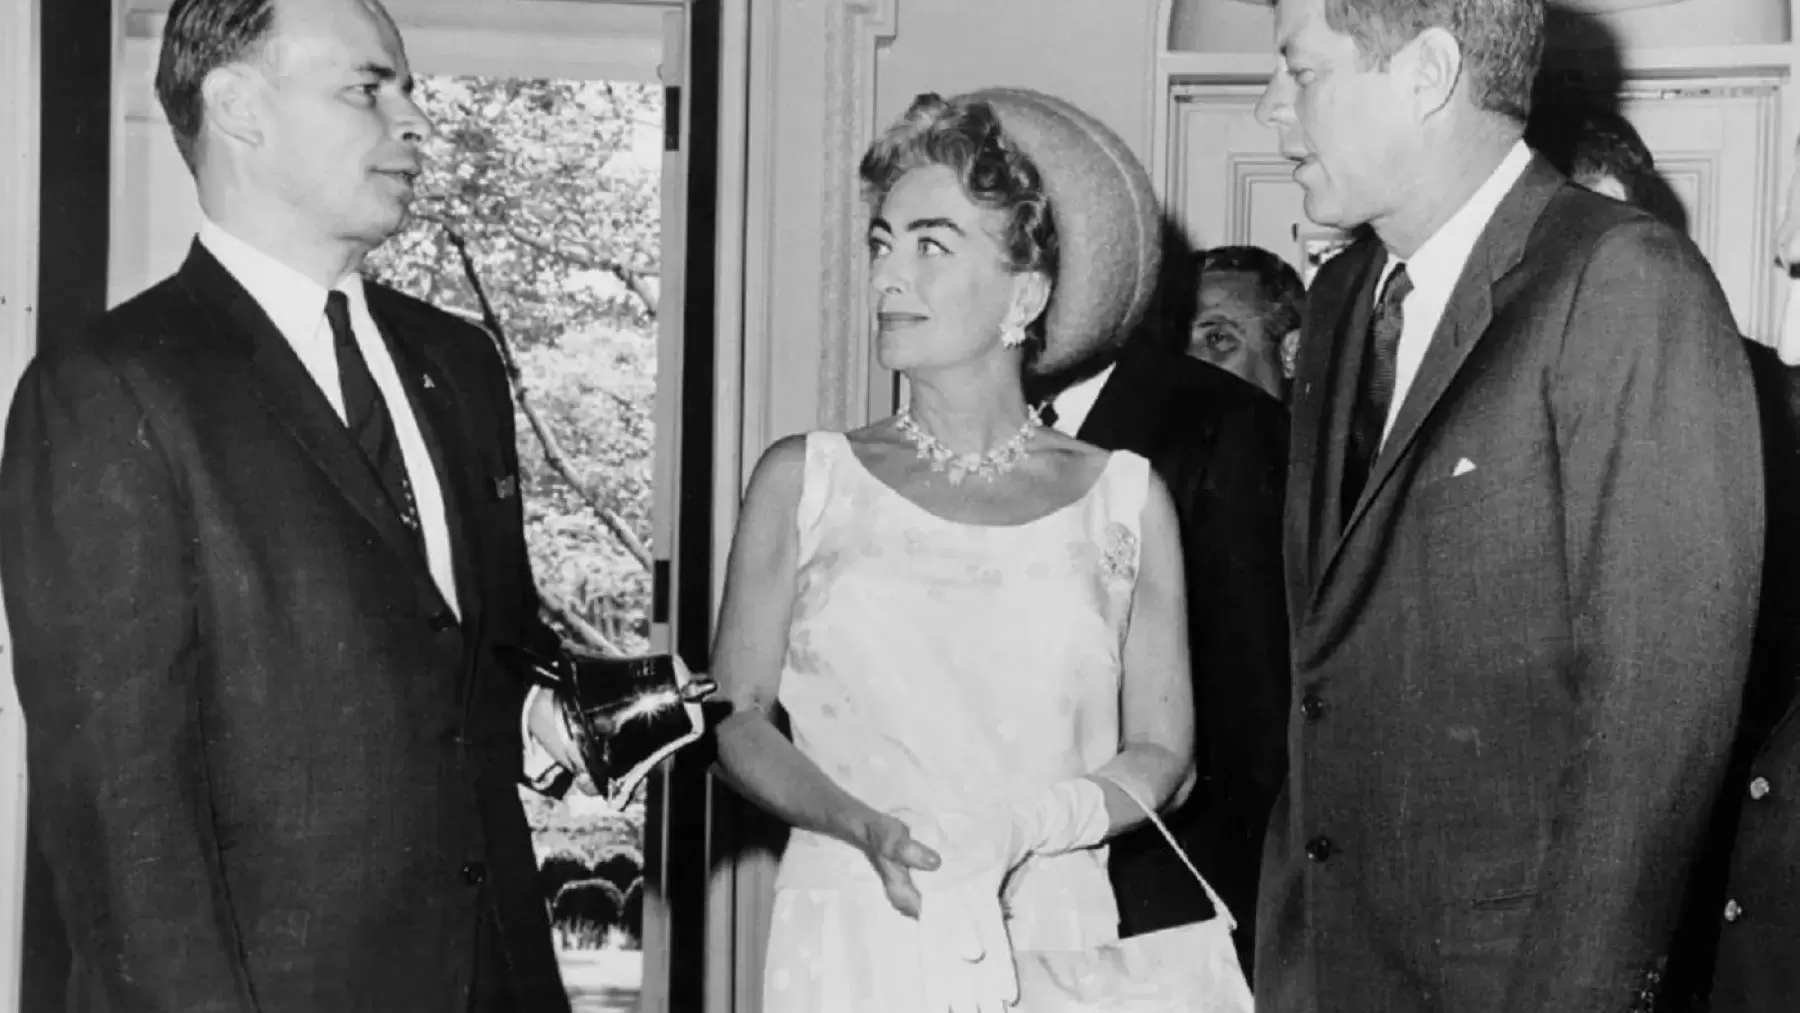 Frank Proctor, Board Chair for the National Mental Health Association, Joan Crawford, and President Kennedy